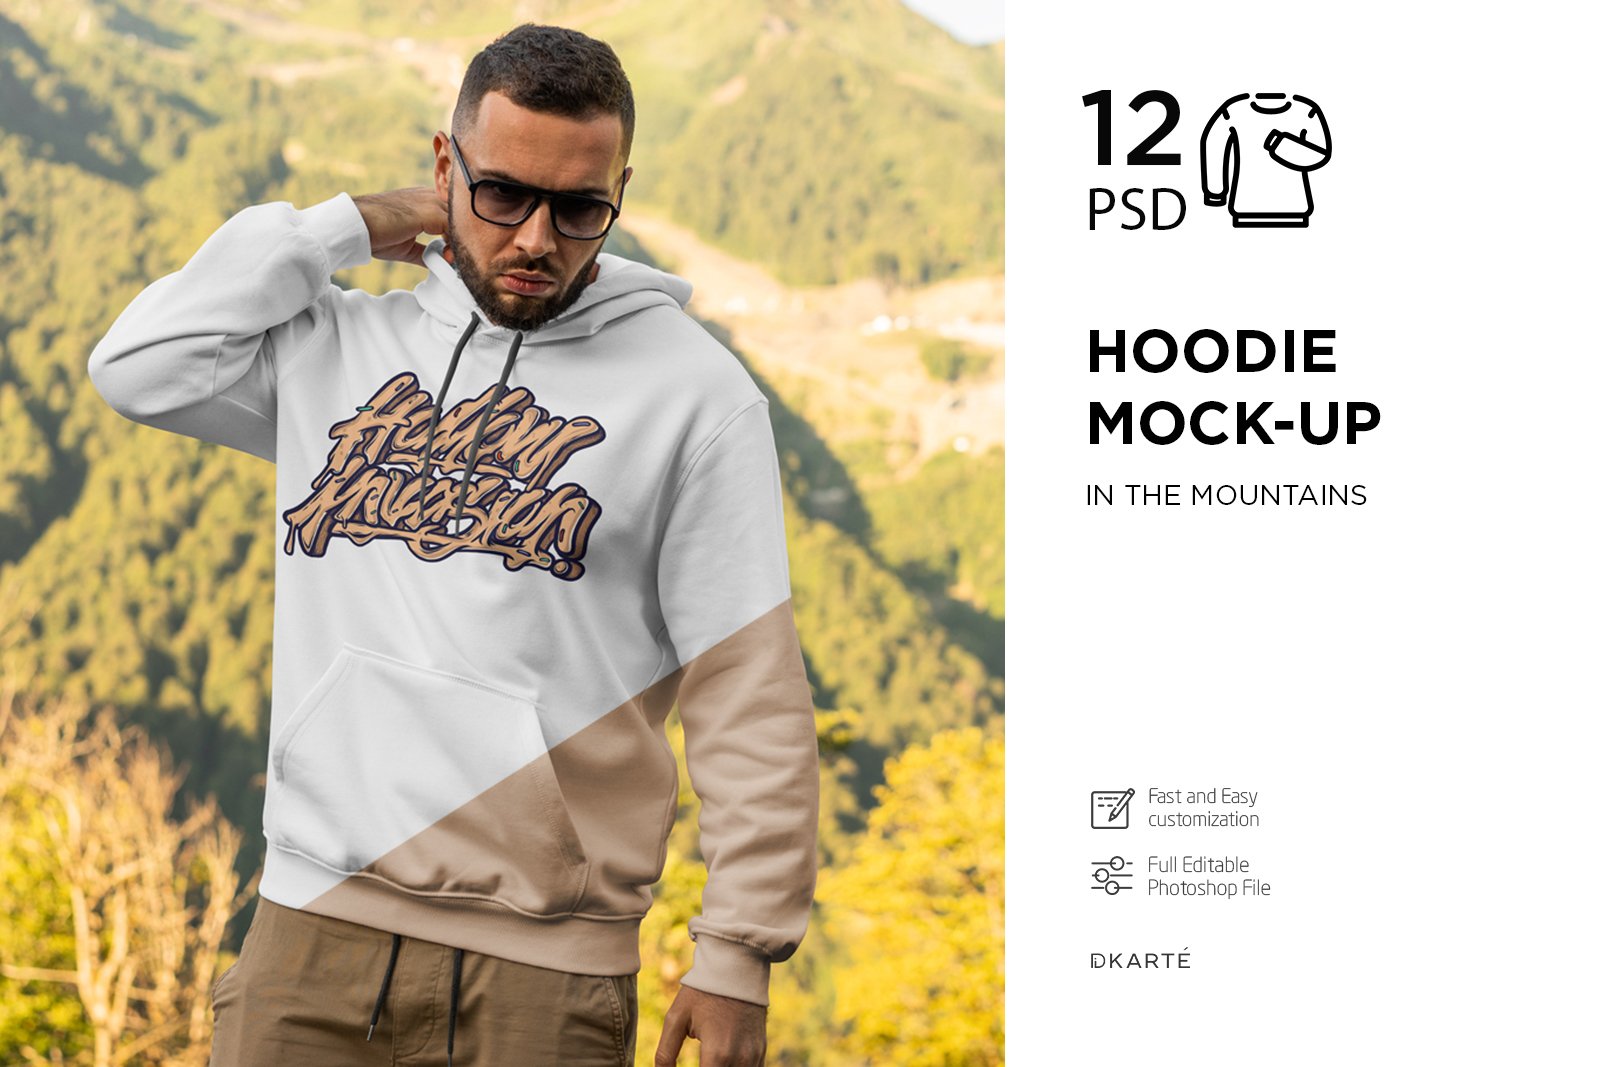 Hoodie Mock-Up Mountains cover image.